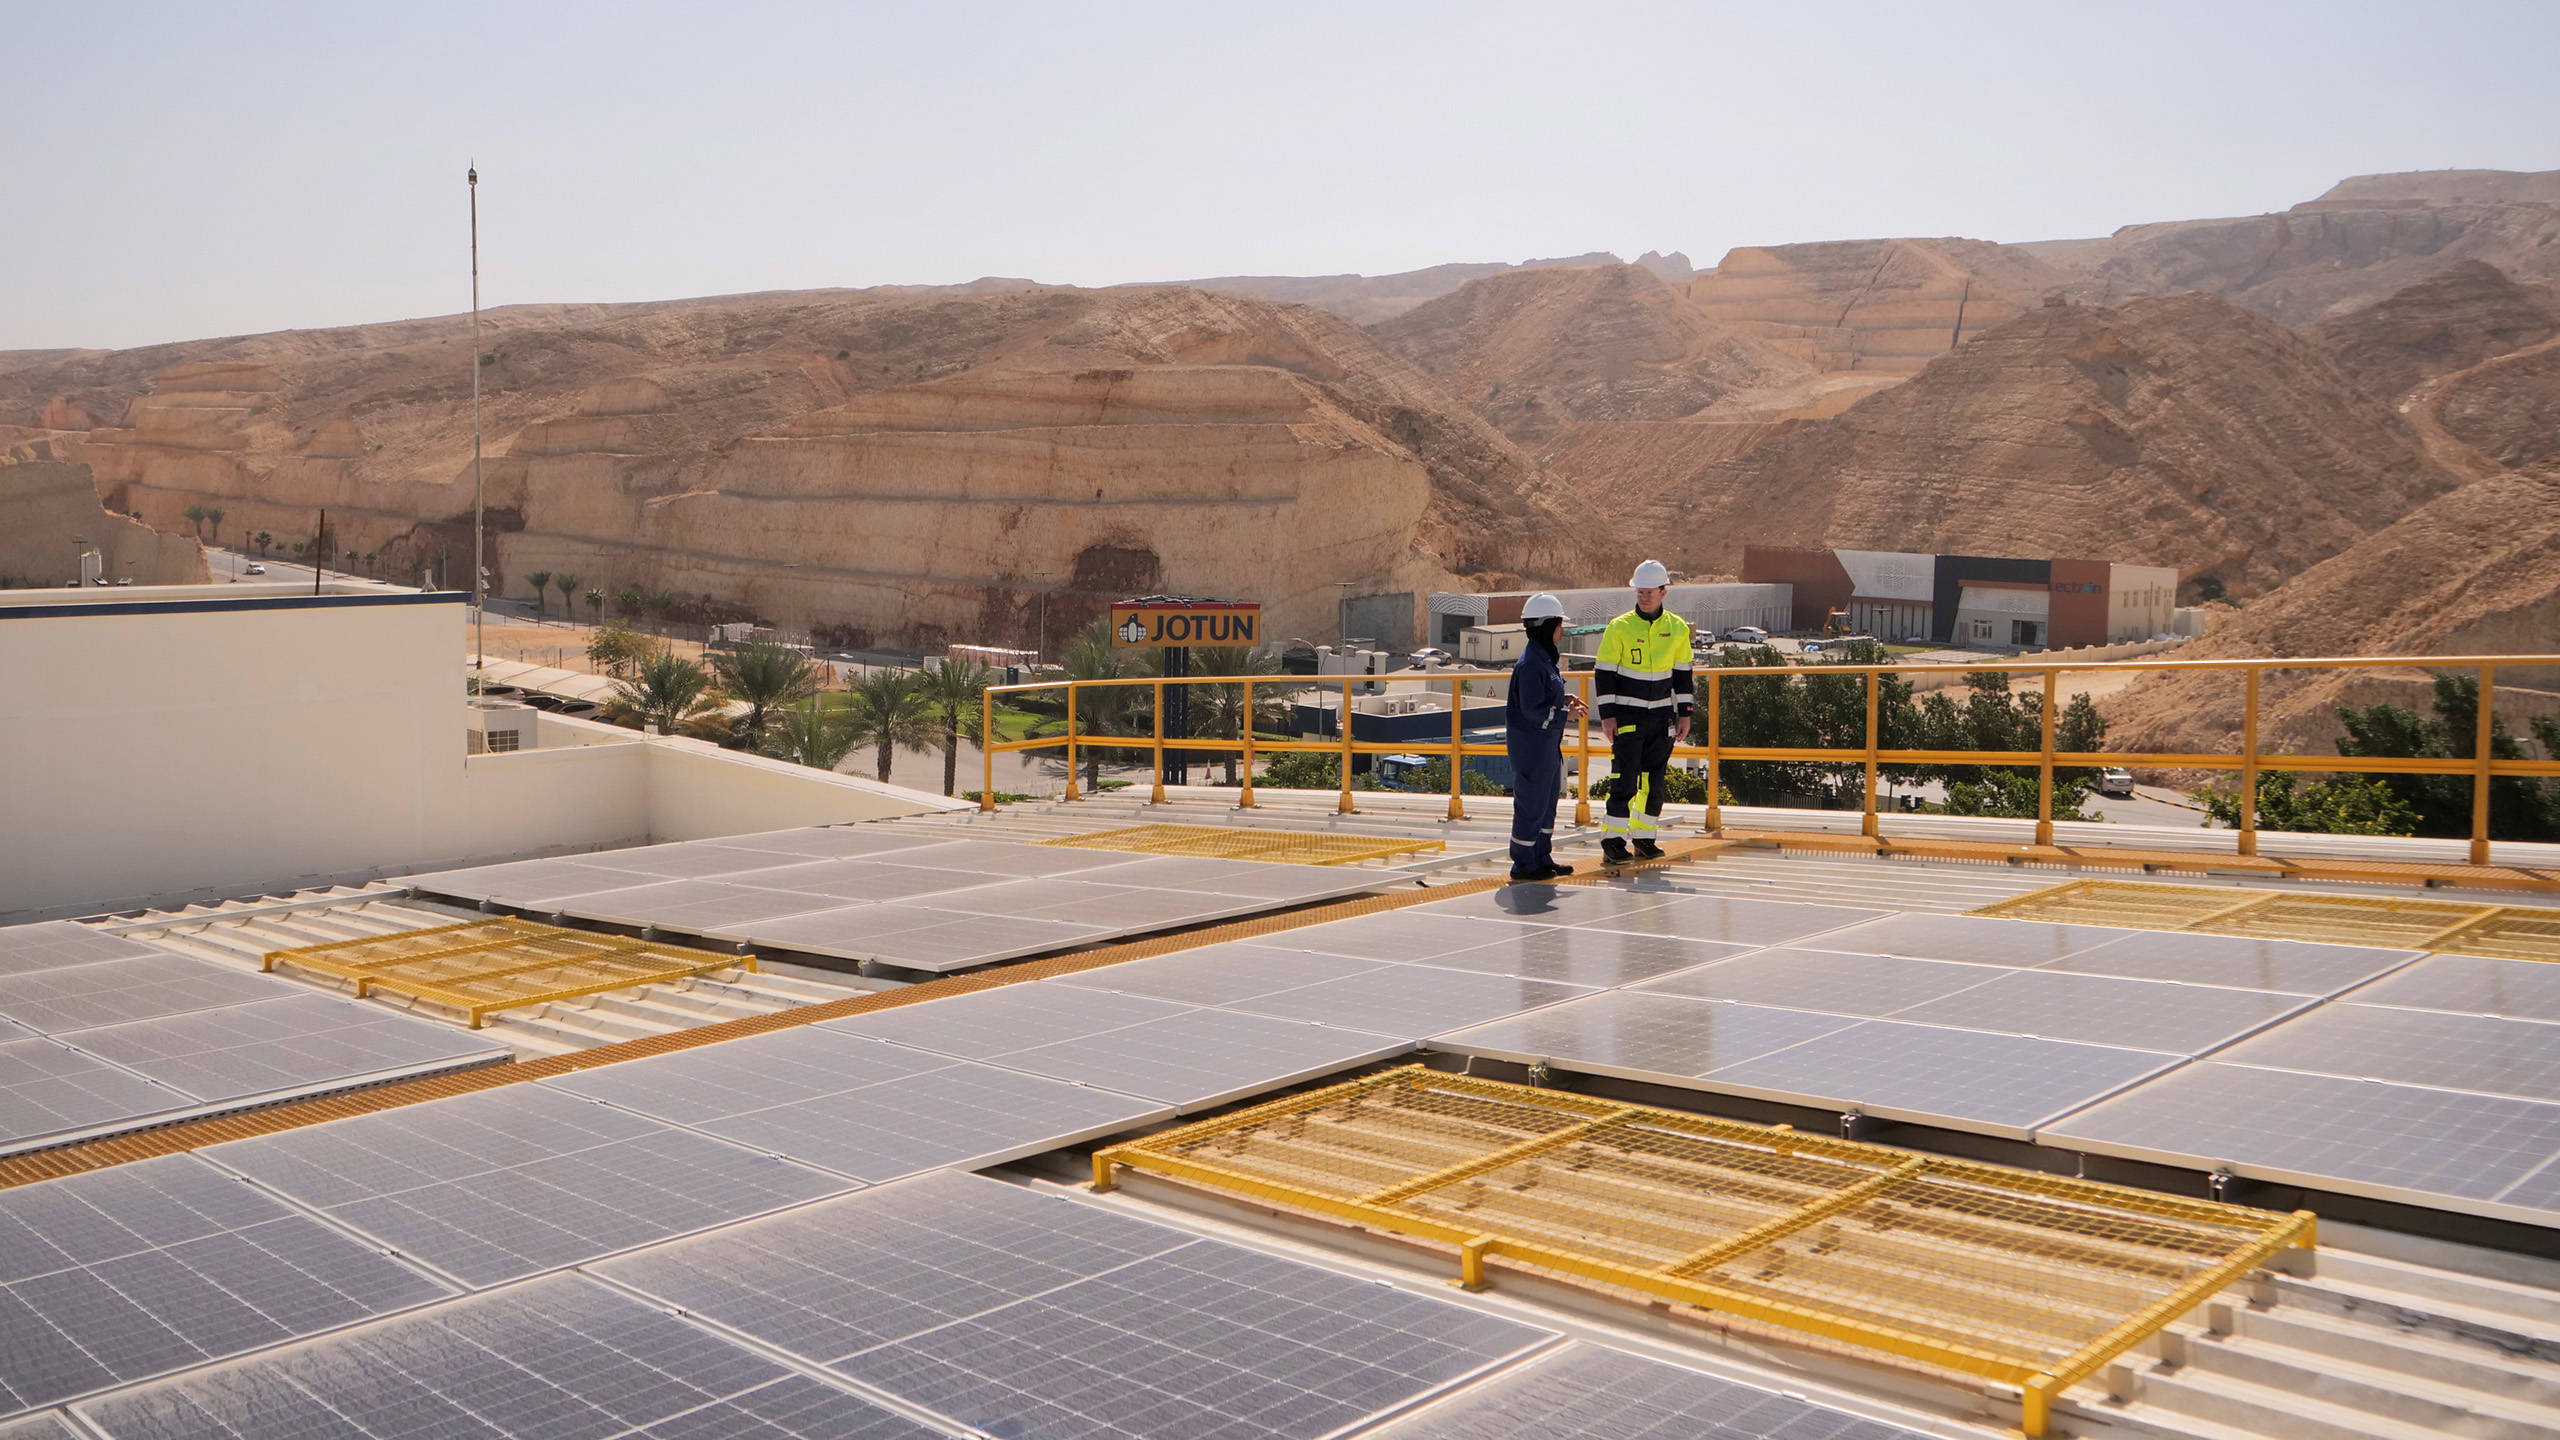 Solar panels on the roof top of Jotun's factory in Oman